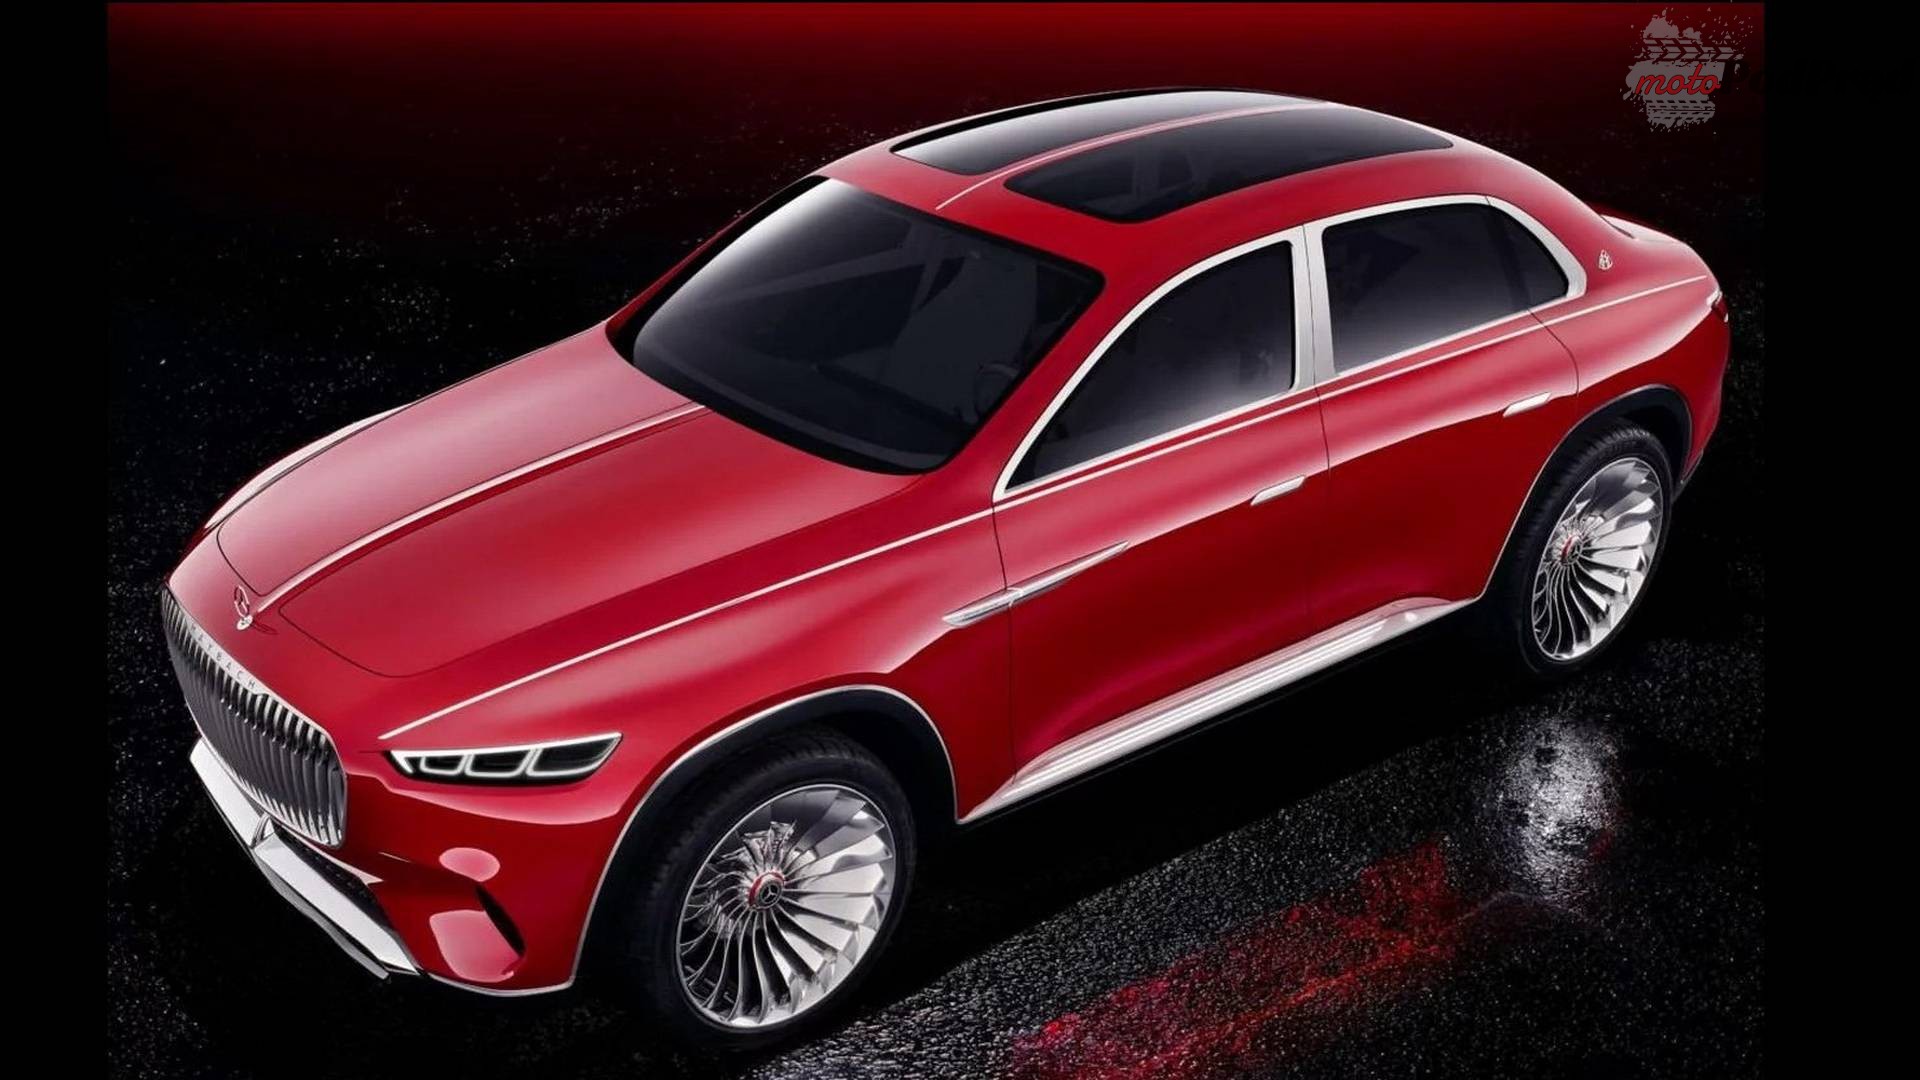 vision mercedes maybach ultimate luxury leaked official image 1